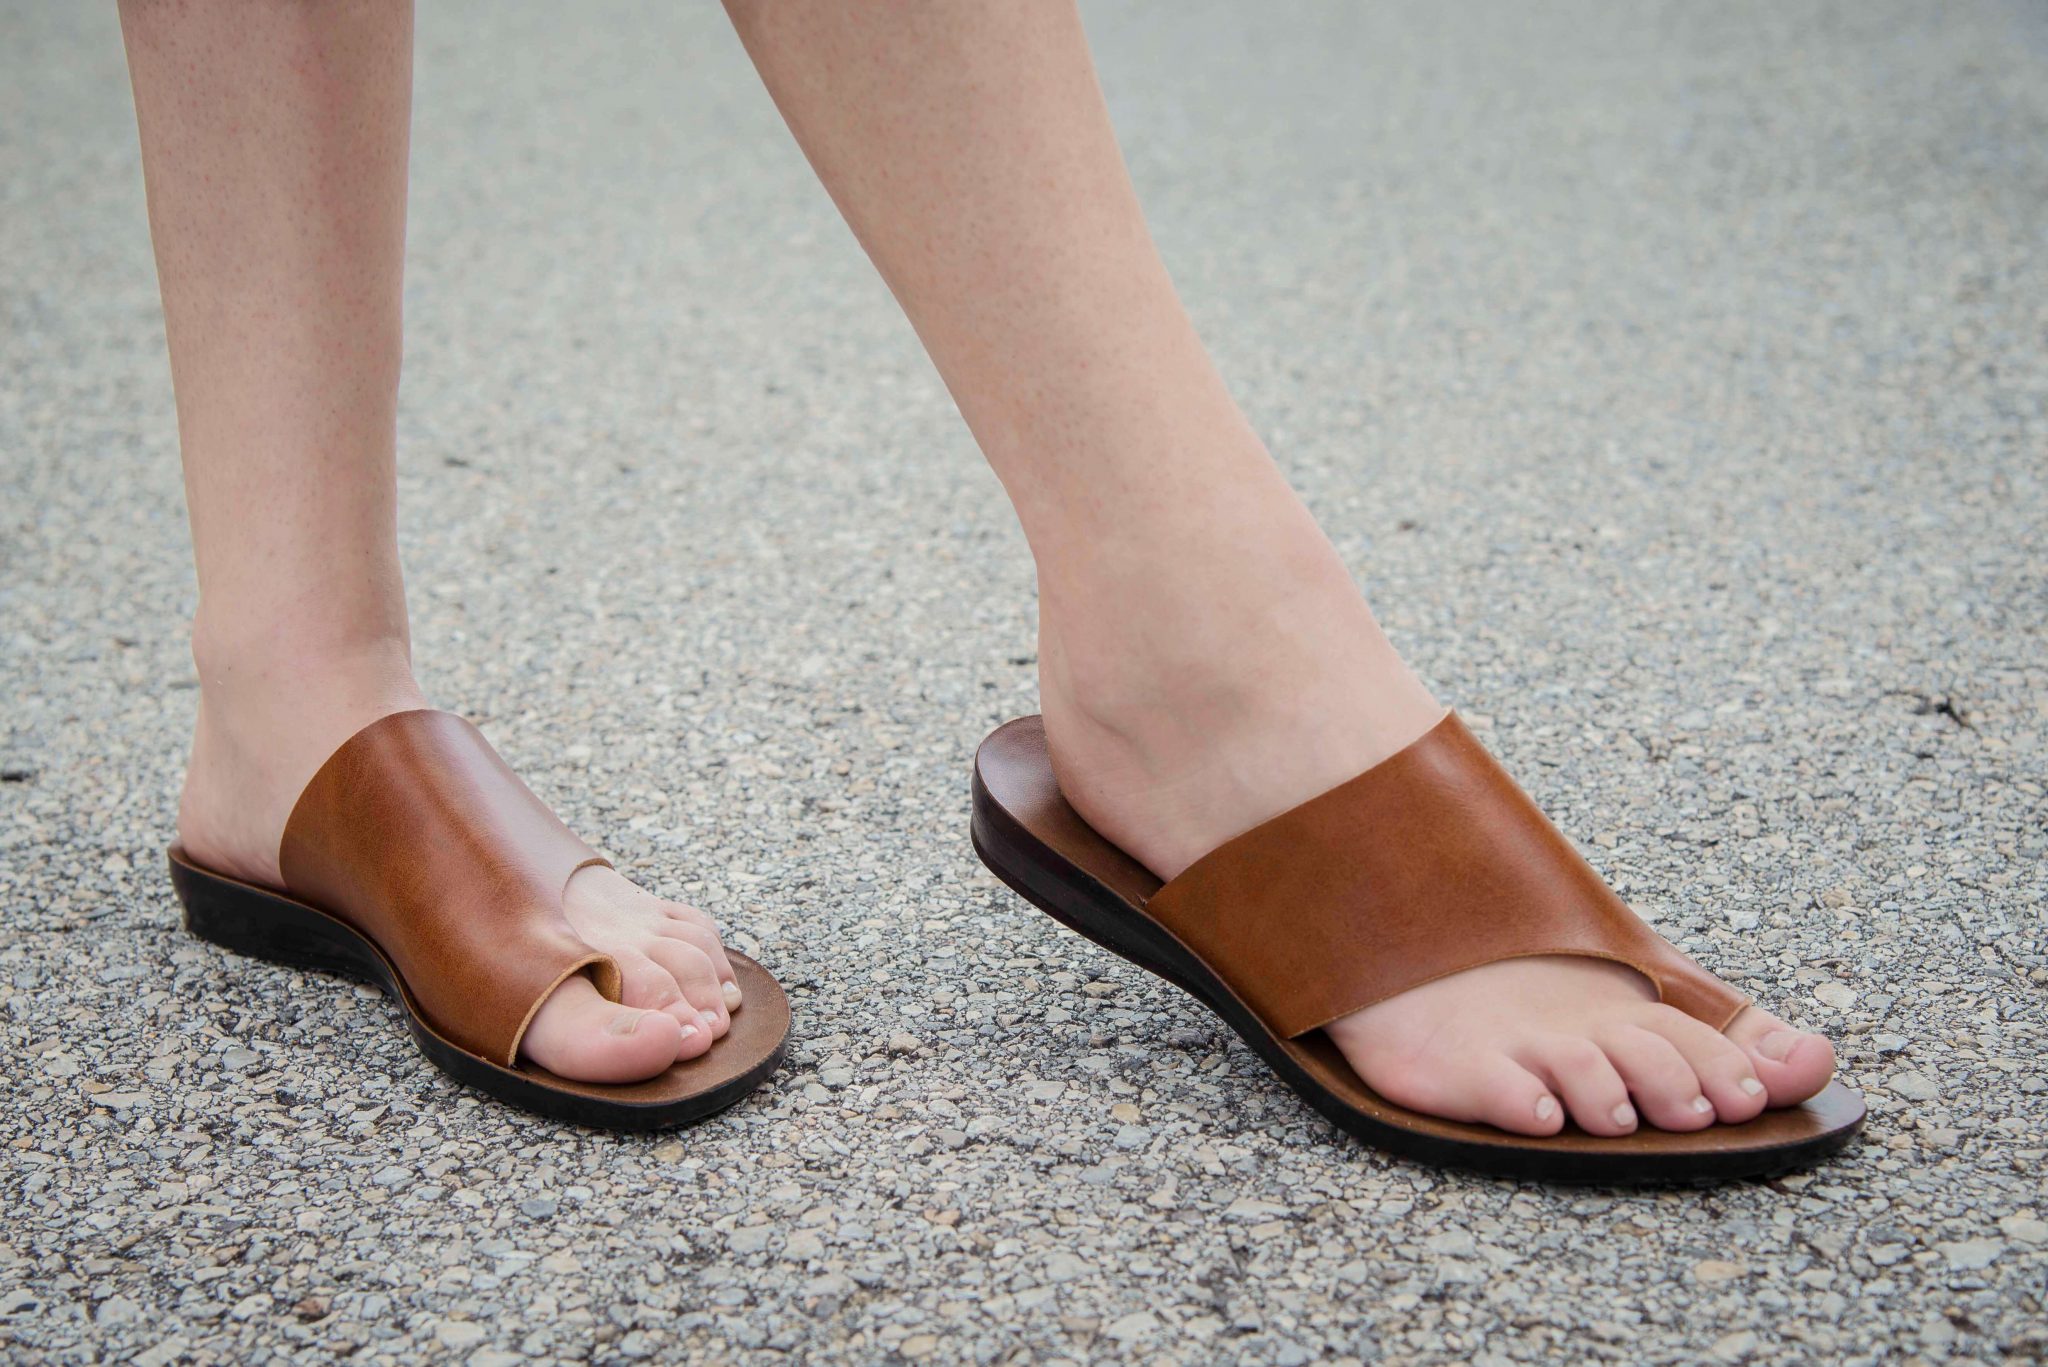 How Do You Make Big Feet Look Smaller In Sandals?